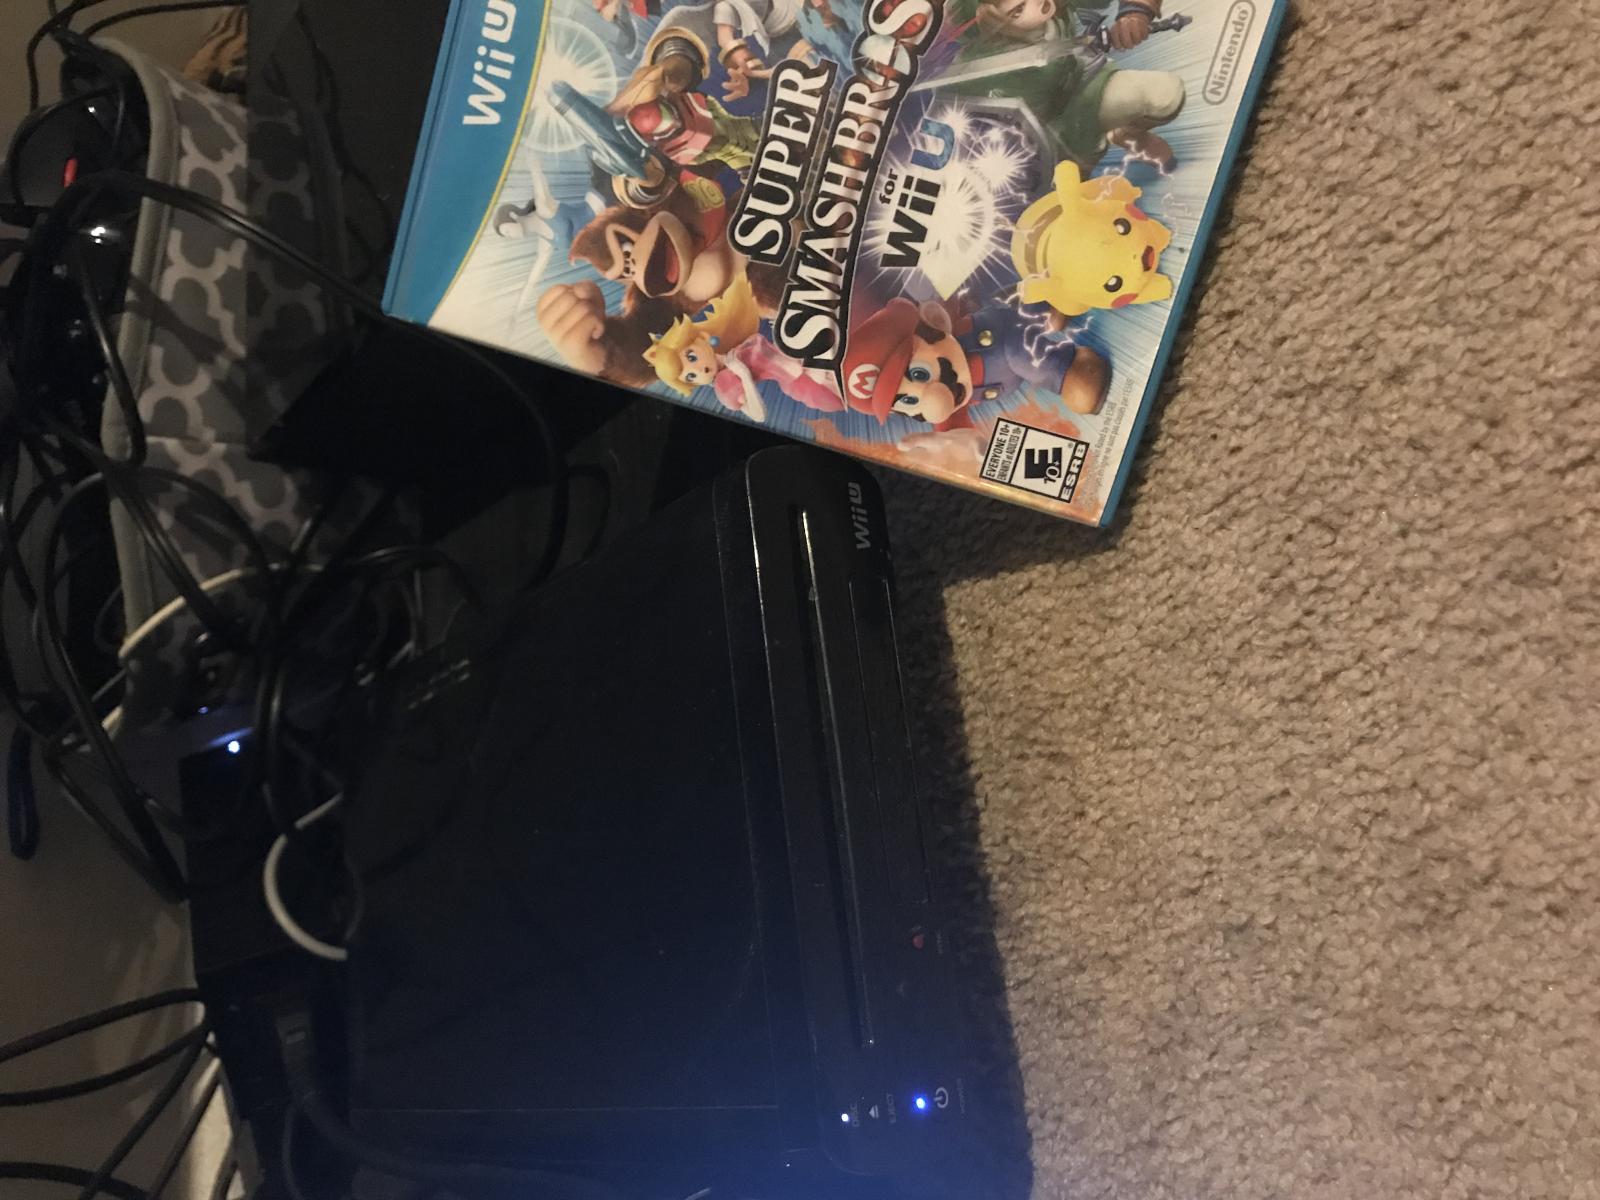 For sale Wii U 32 gb with Super Smash Bros